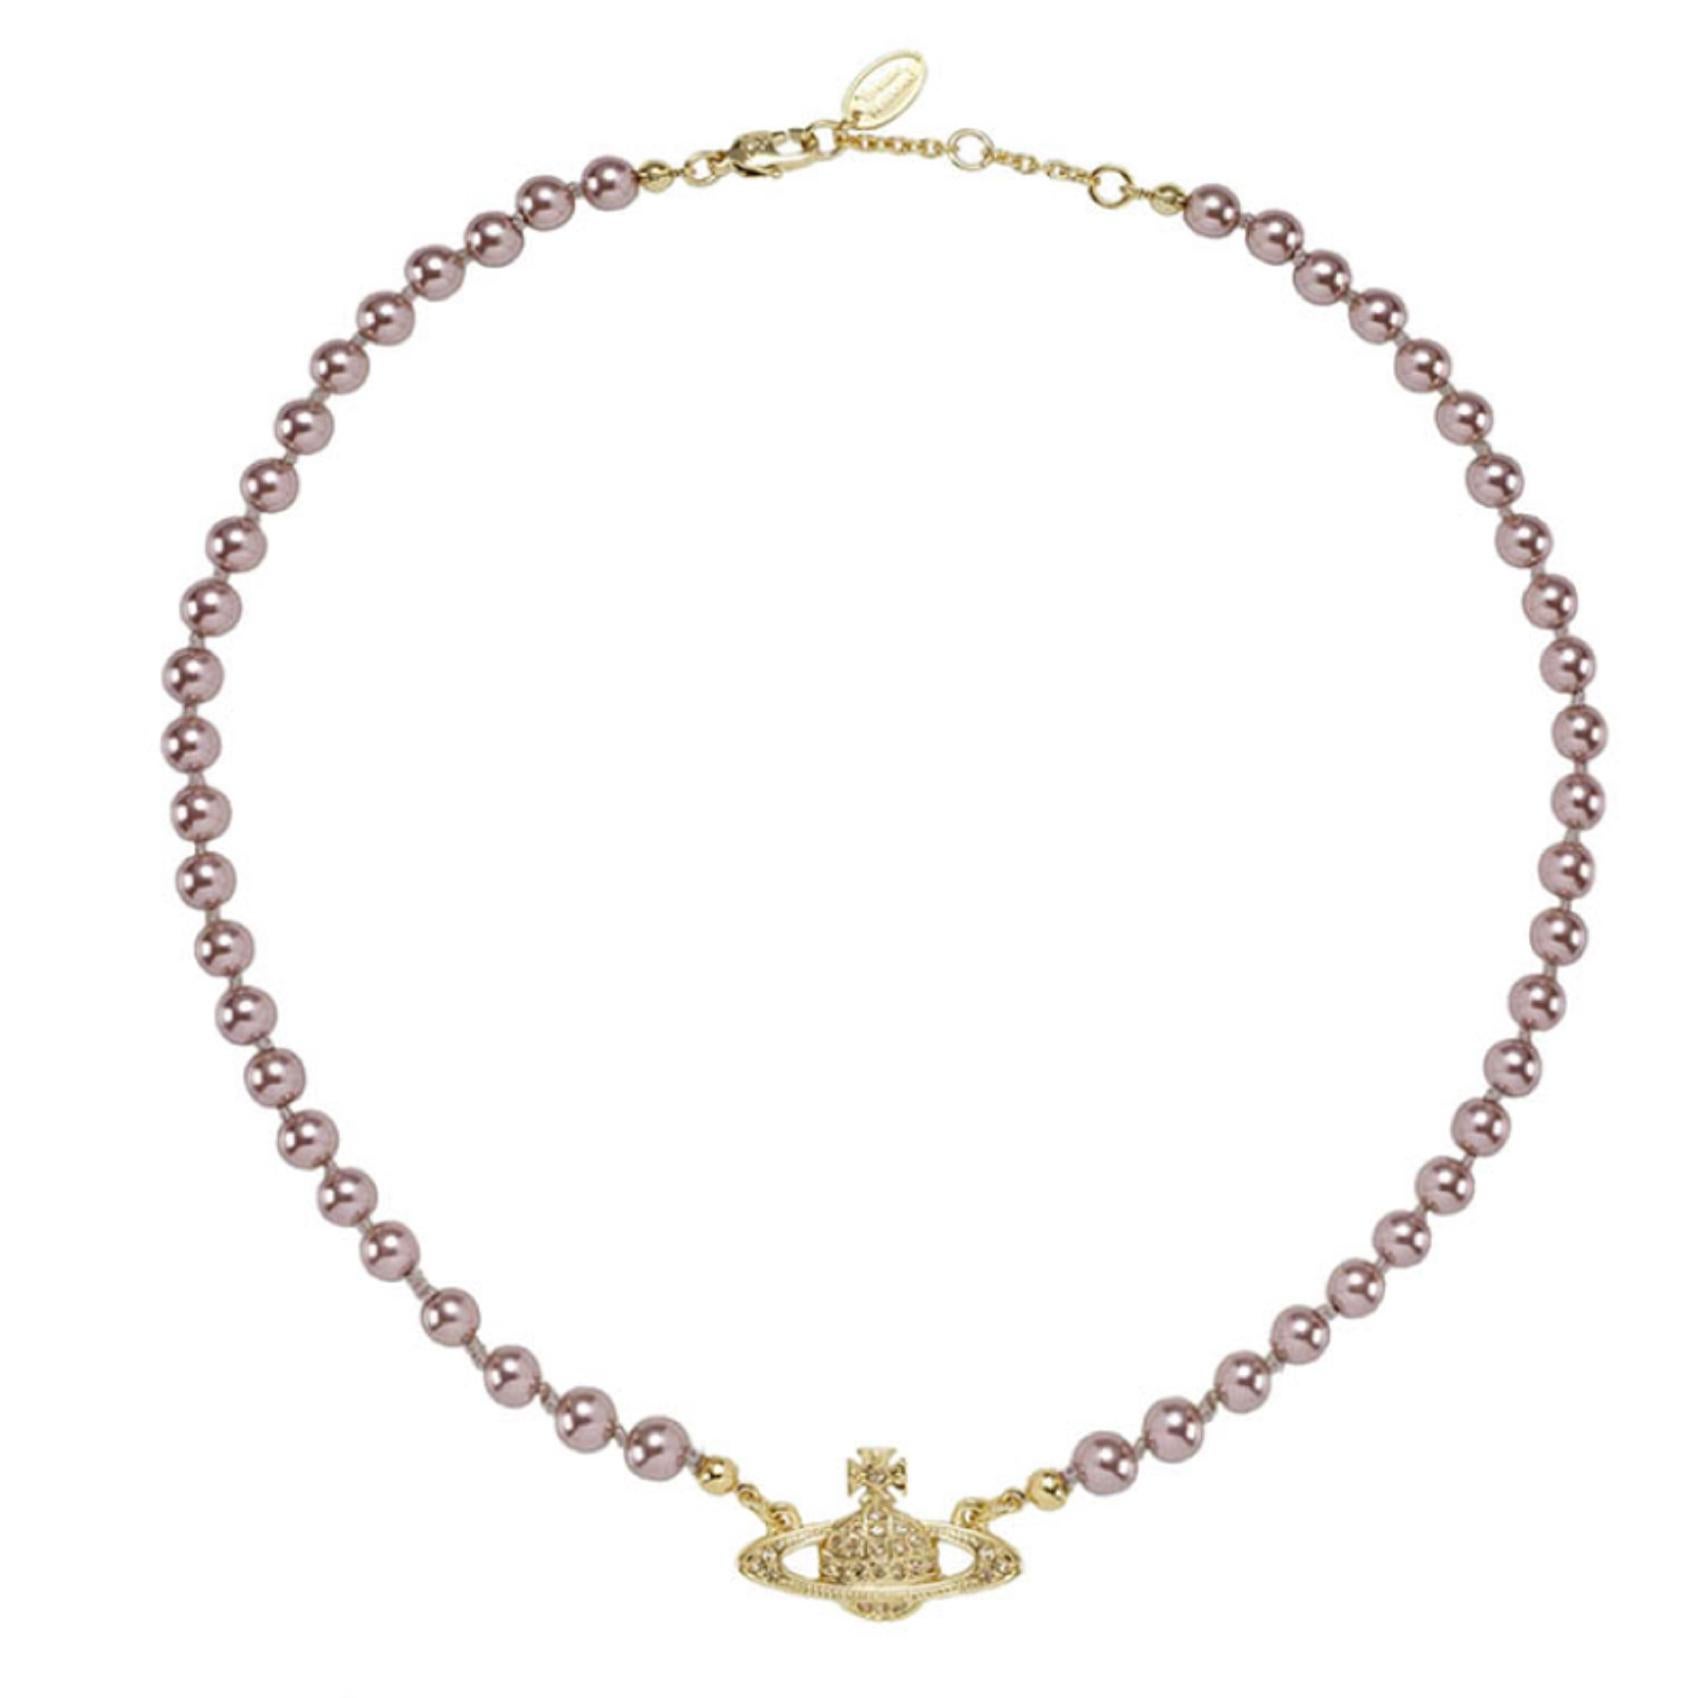 Vivienne Westwood Bas Relief Pearl choker gold/light topaz. With a string of pastel faux pearls. The Orb has light Colorado Topaz Swarovski crystals and an adjustable choker, with three fine links allowing the length to be altered.

COLOR: Rose